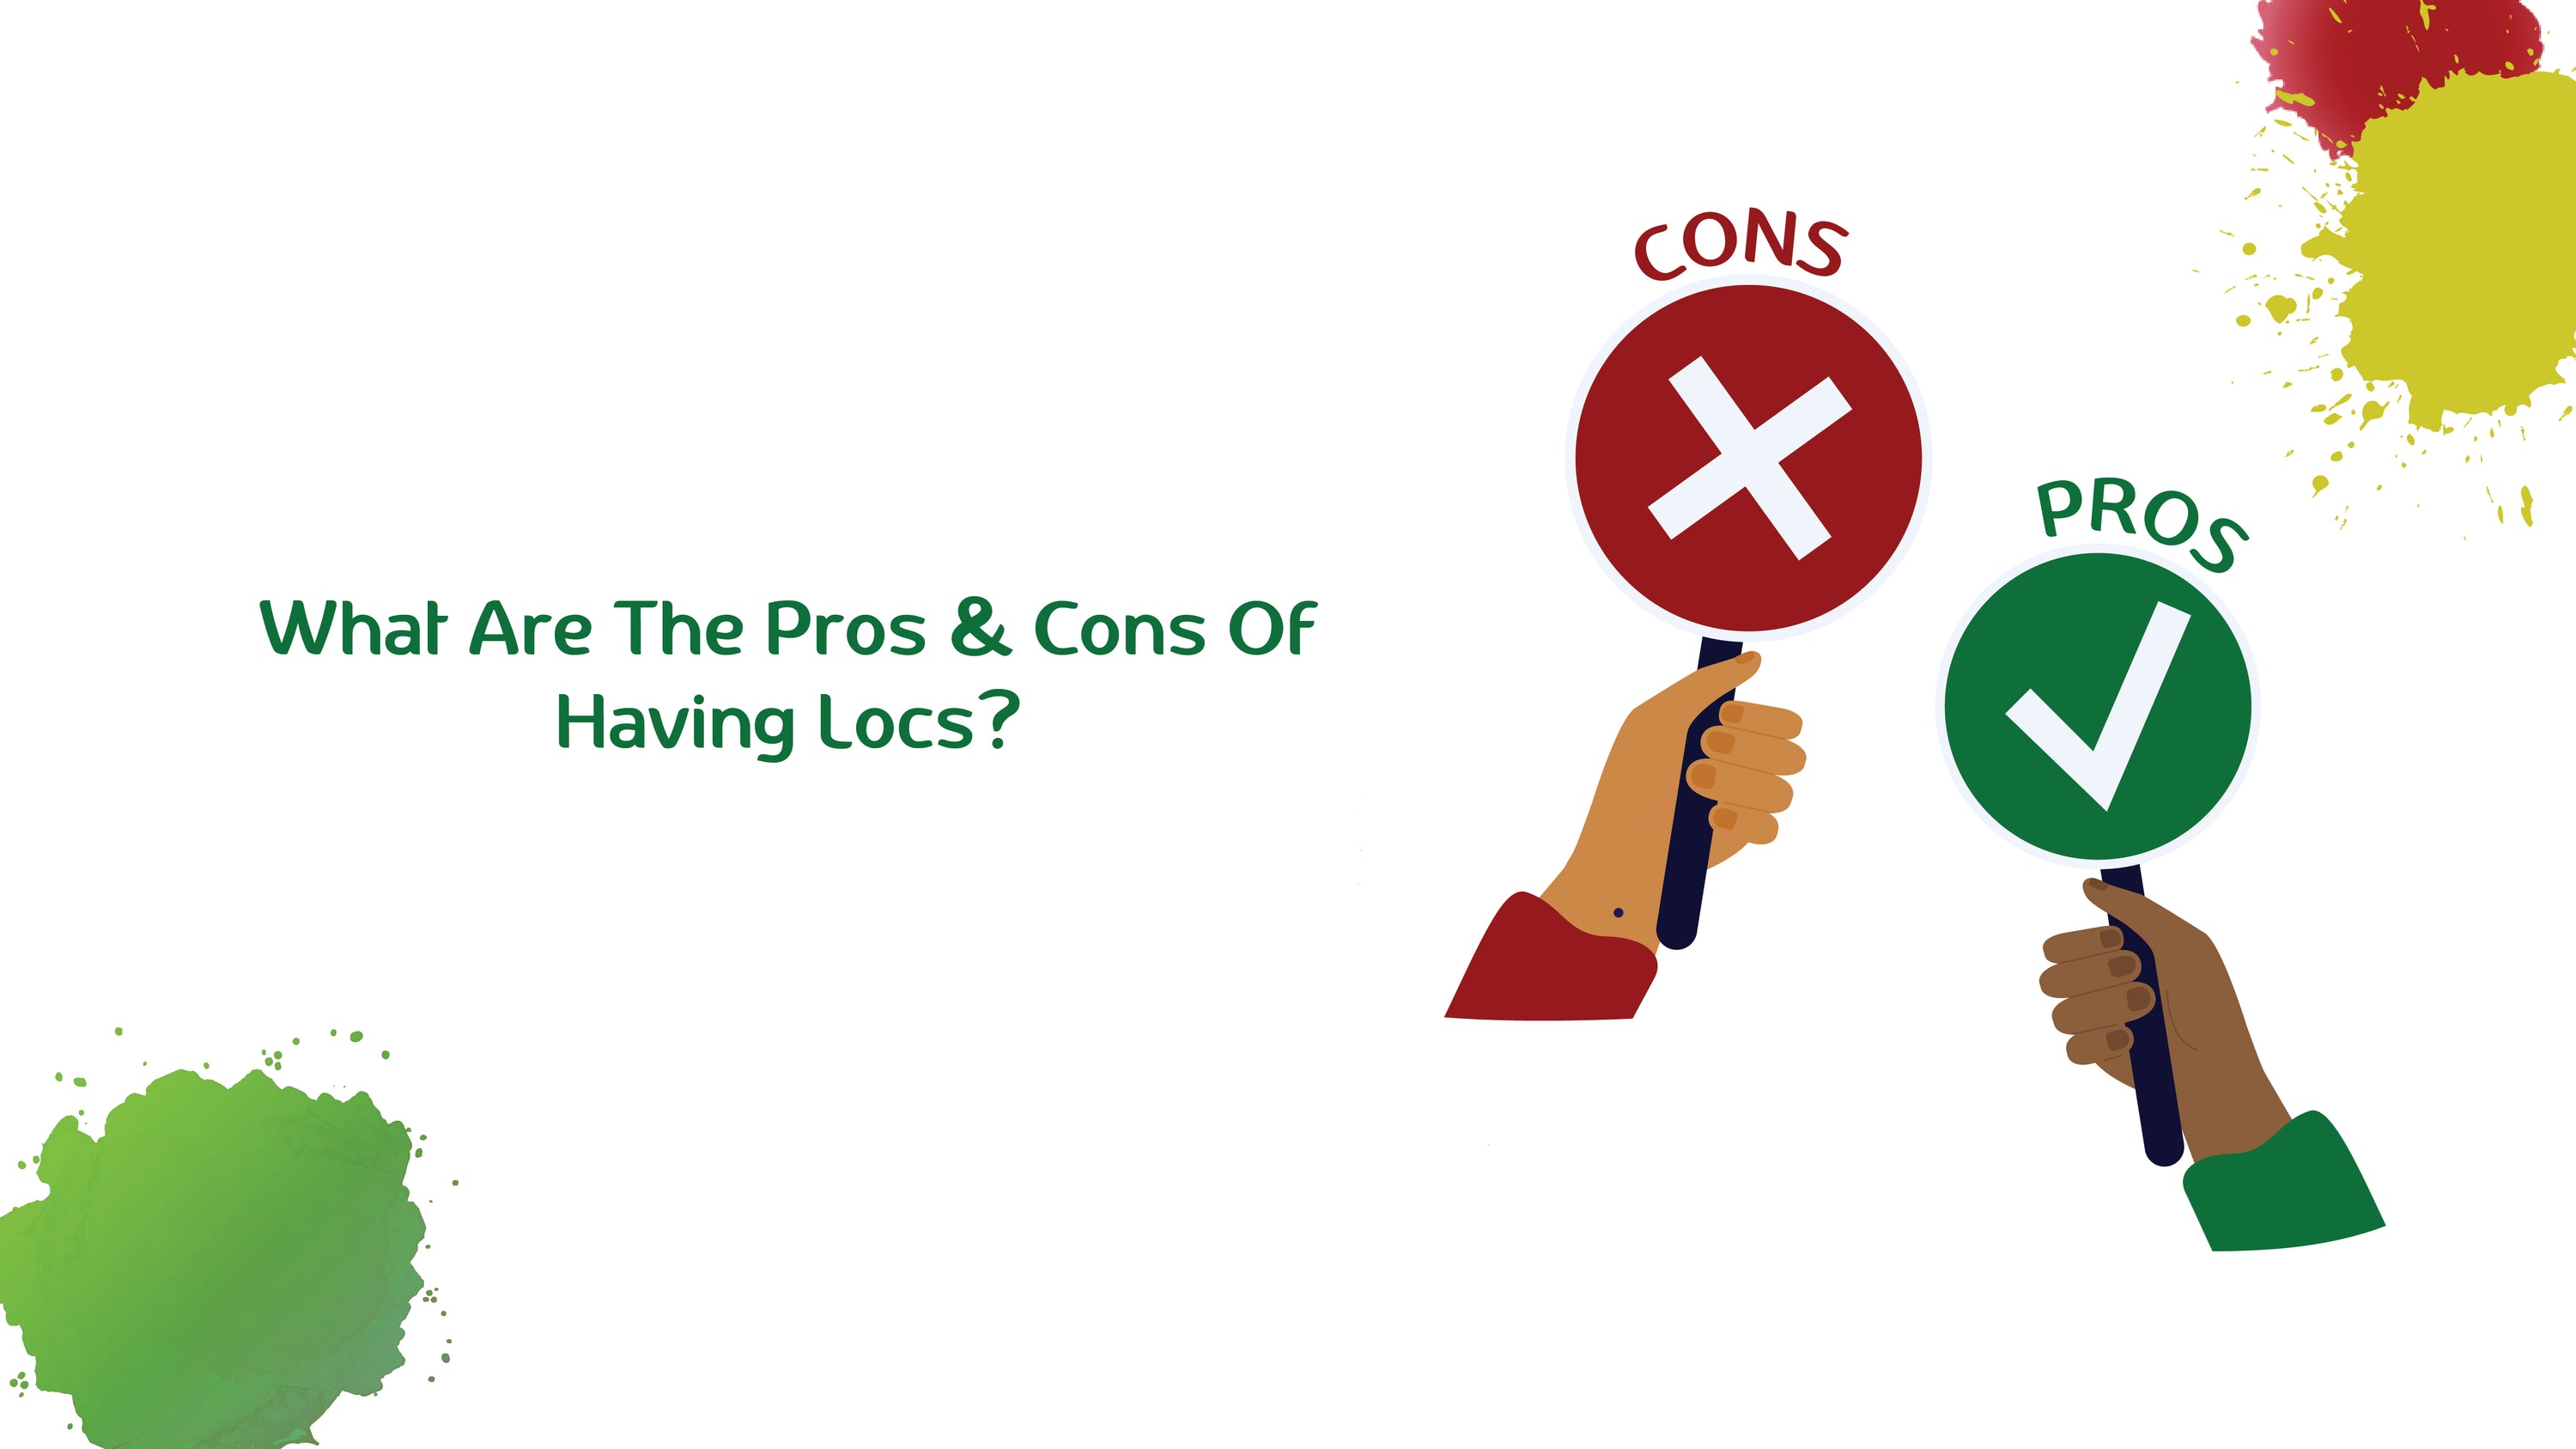 What Are The Pros & Cons Of Having Locs?